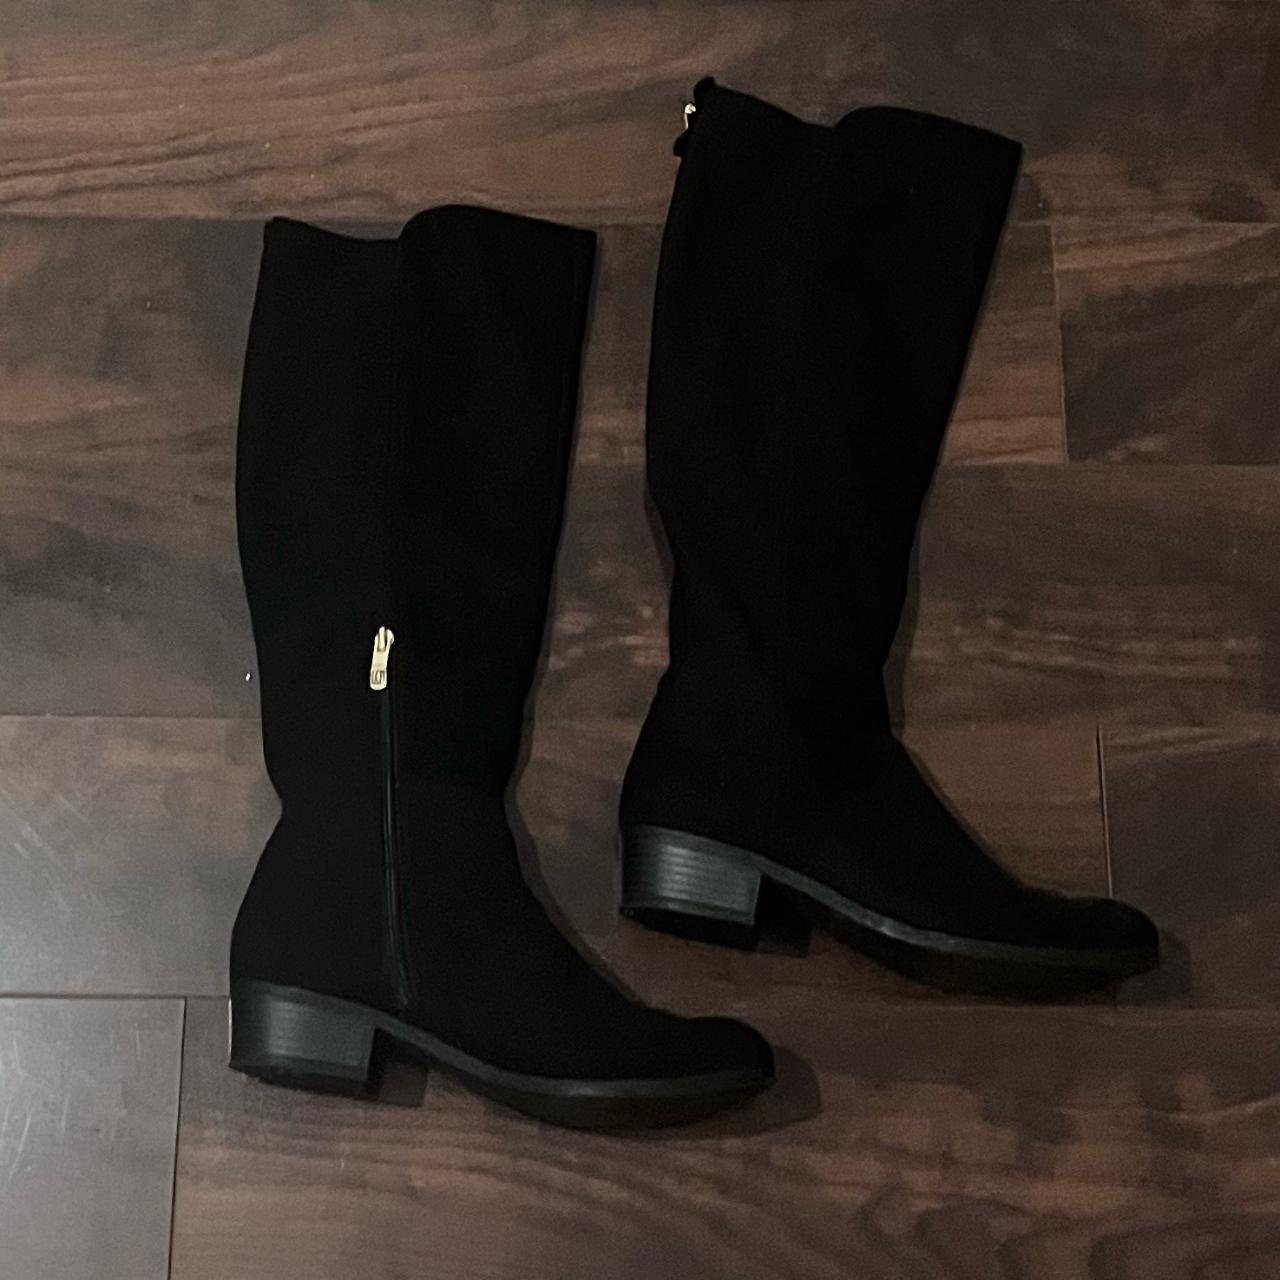 Liz Claiborne Stacked Heel Riding Boots, I bought